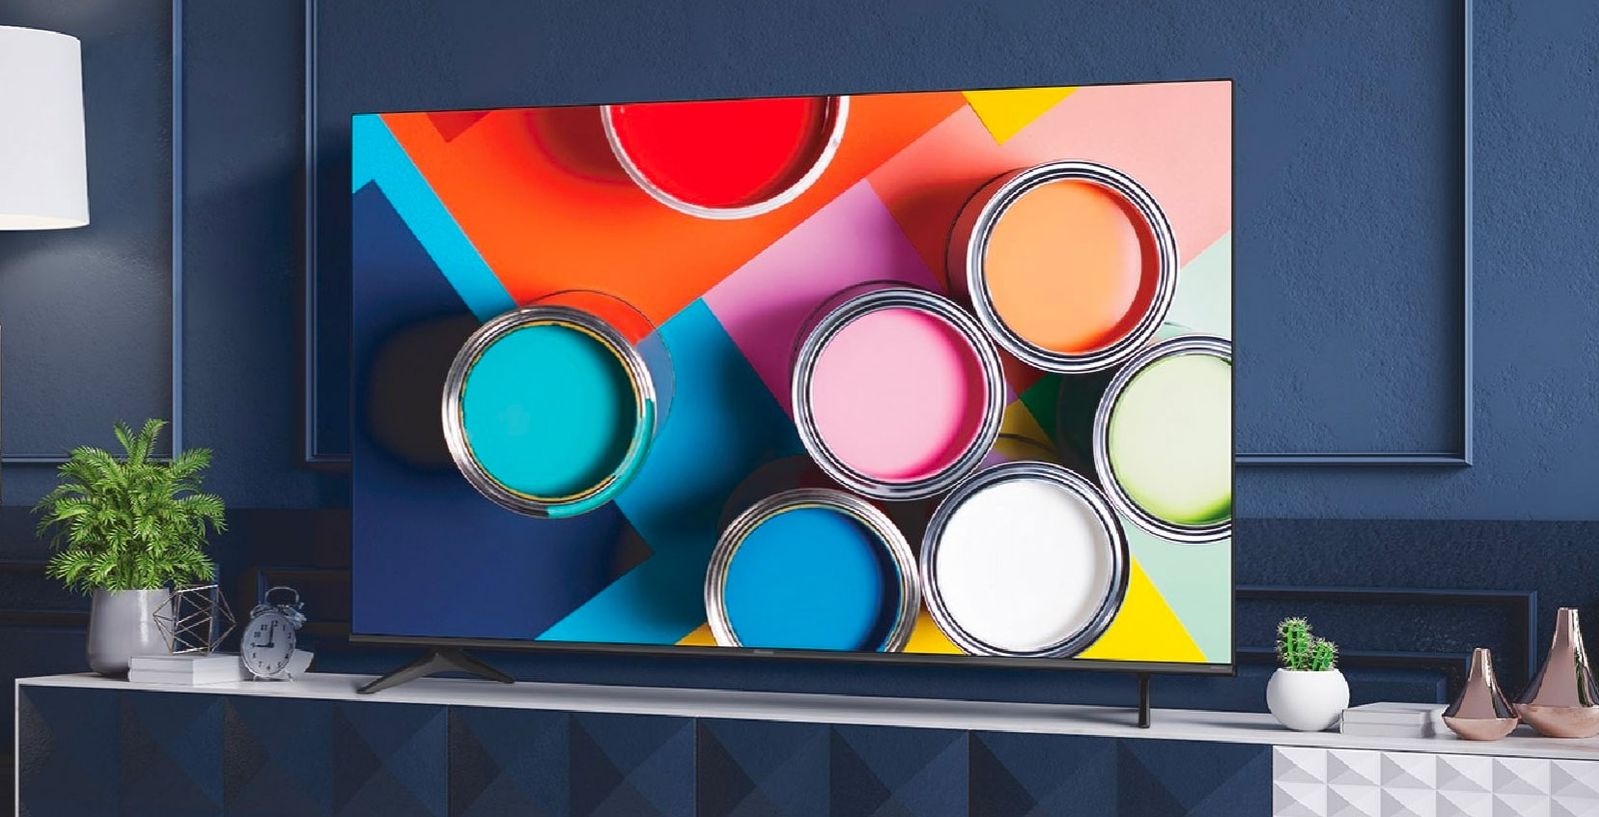 Hisense 55A6G product image of a TV with open buckets of paint on its display.